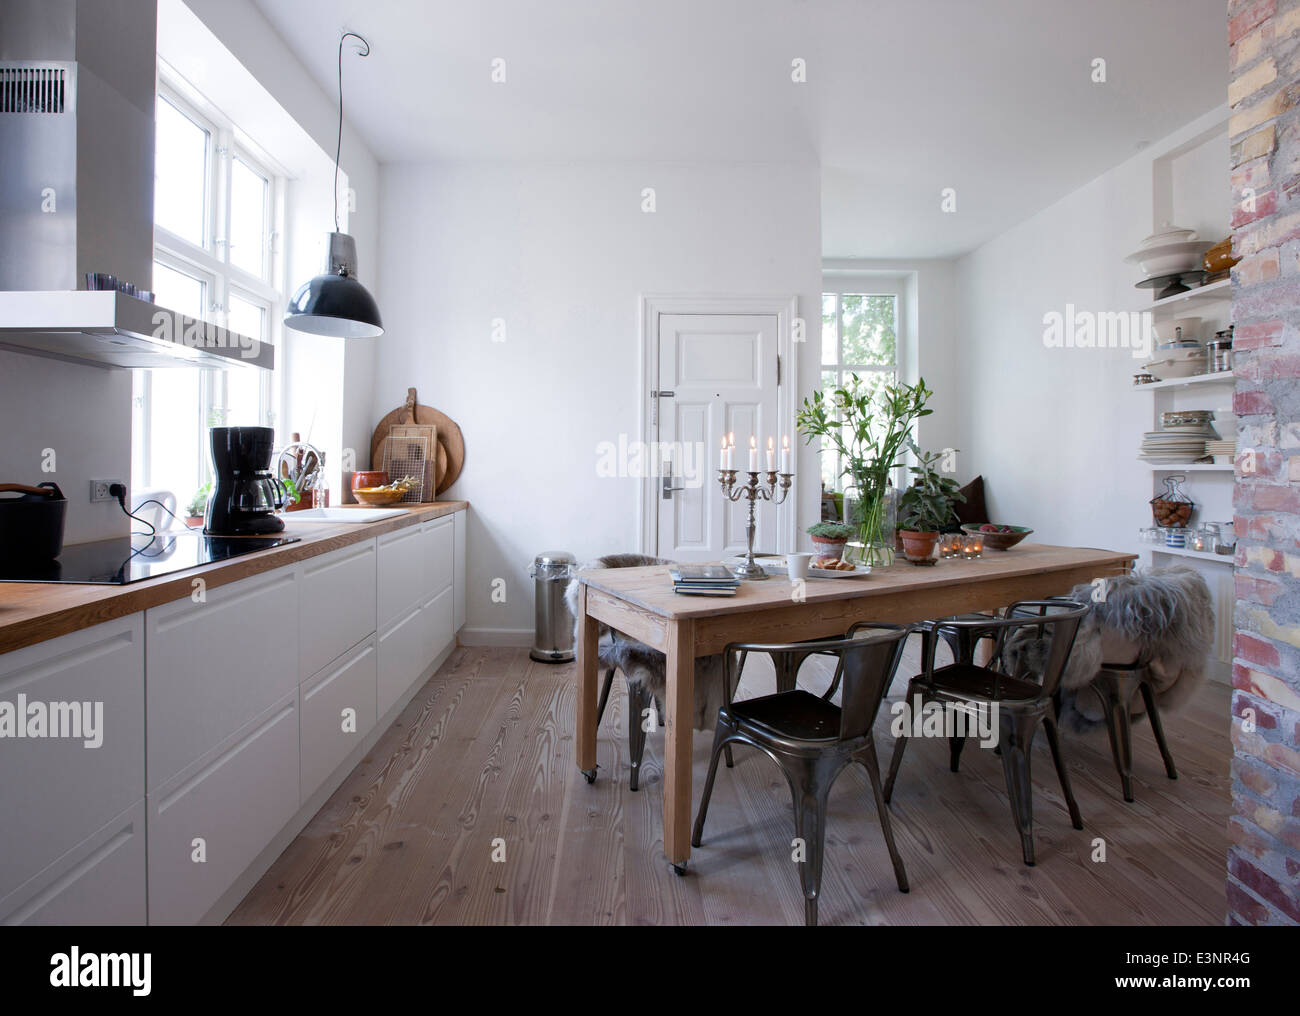 Open Plan Kitchen With Wall Shelving And Window Seat Stock Photo